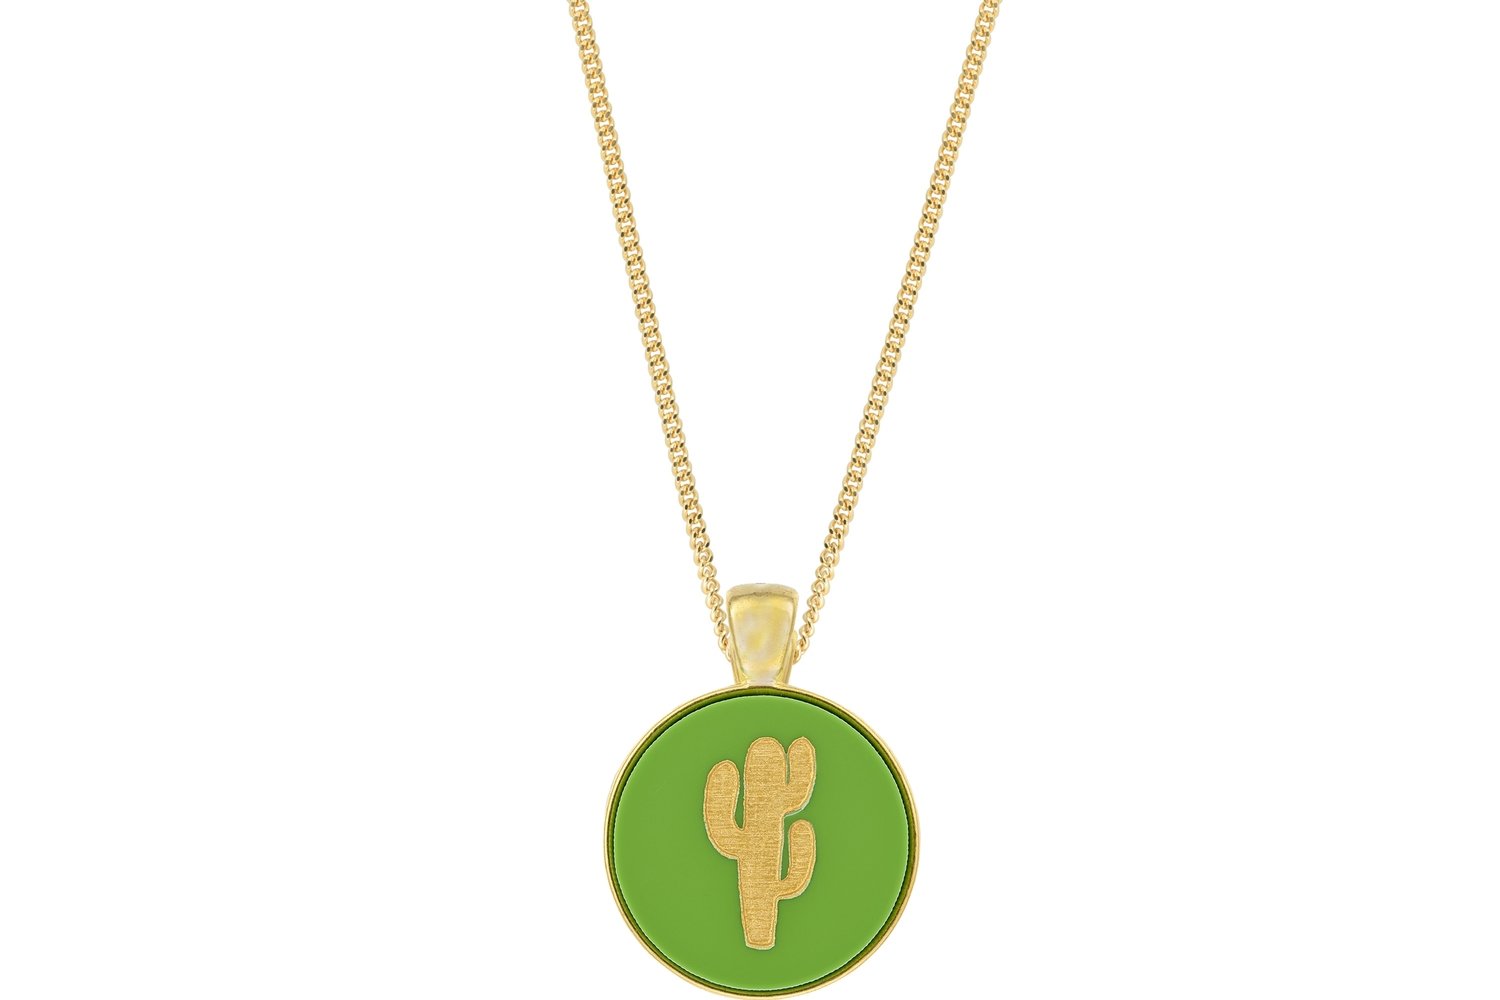 Cactus Pendant Classic Style with Bezel on Chain Necklace